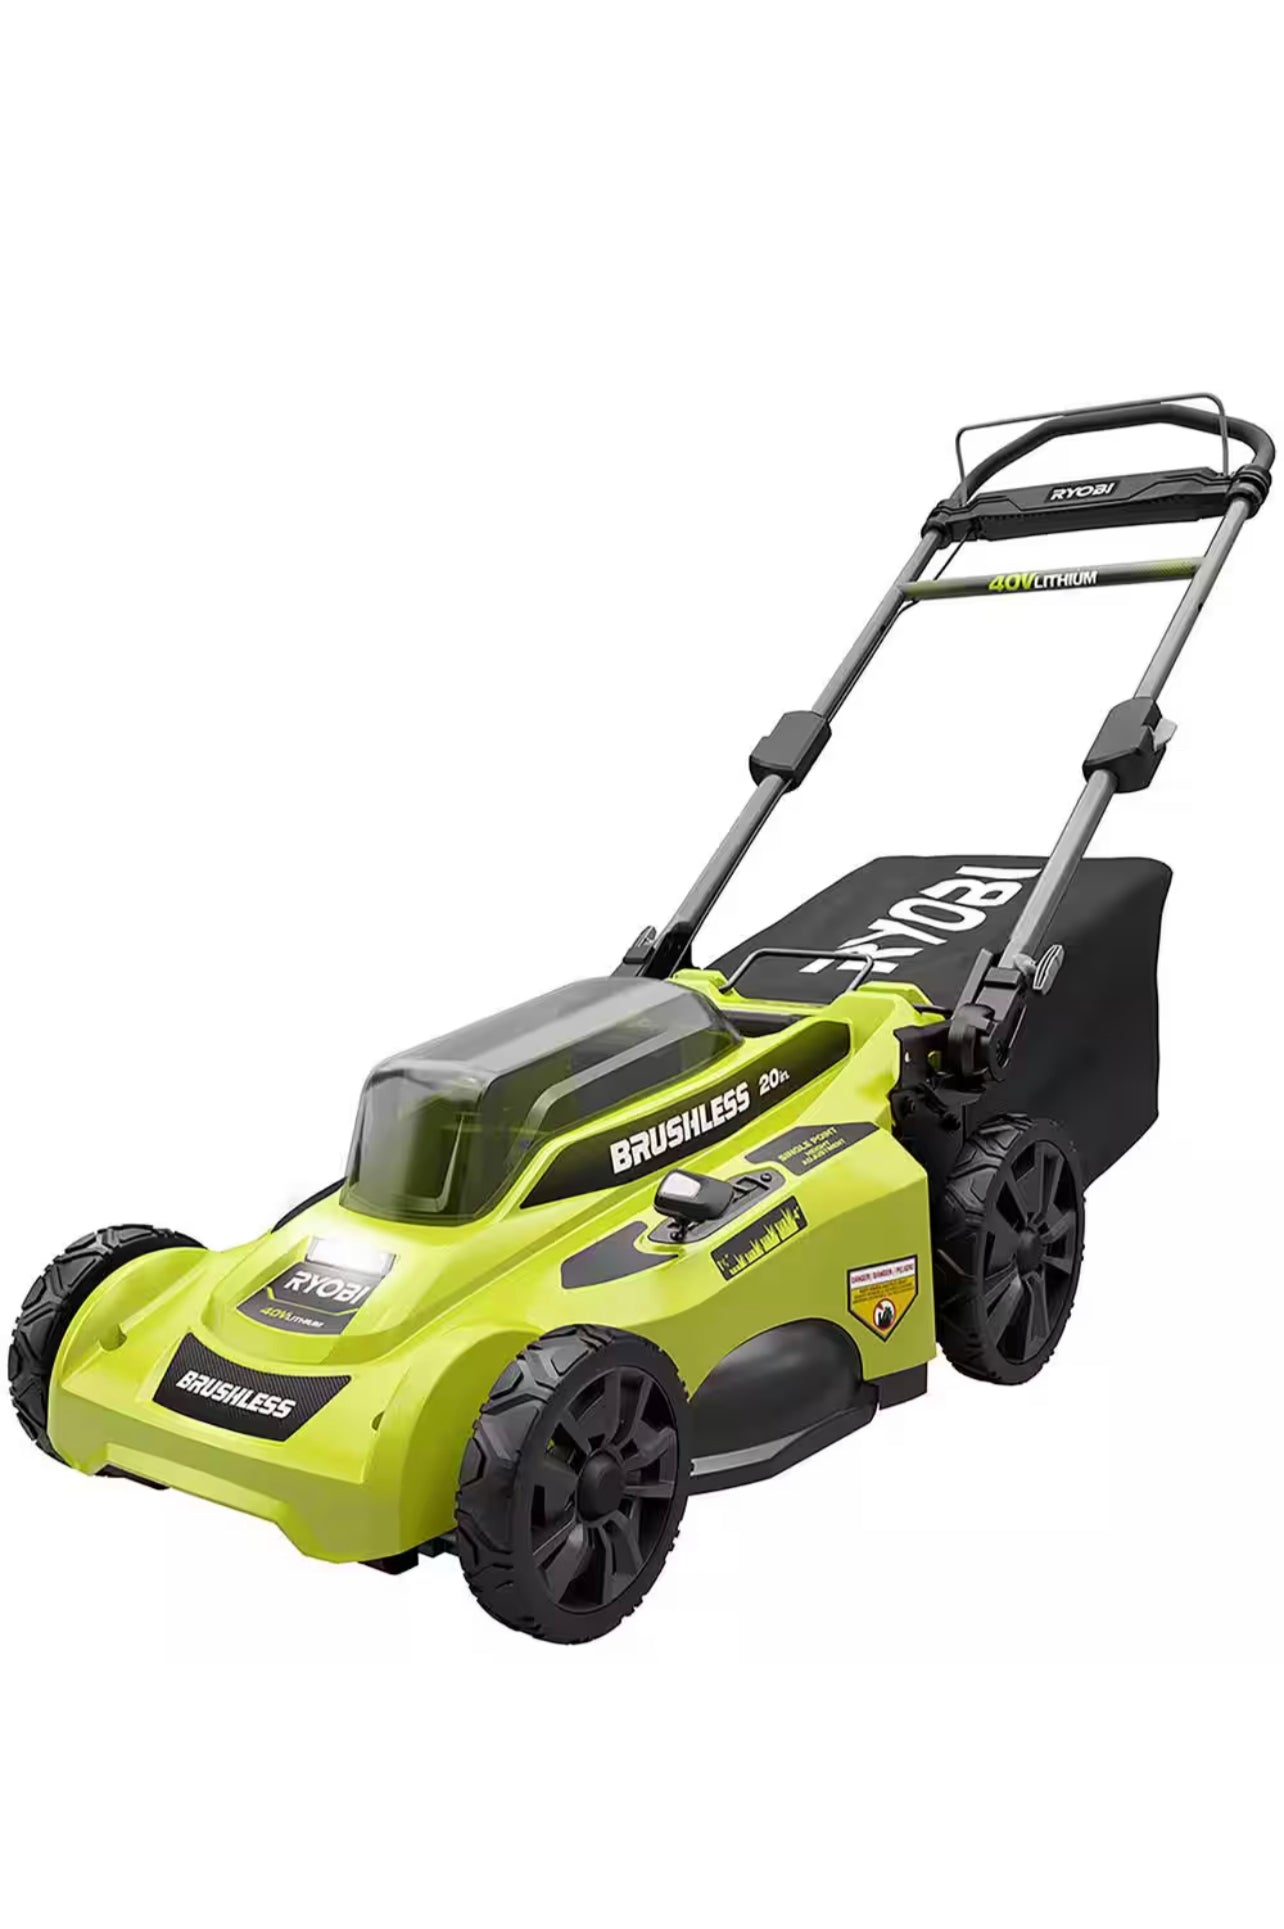 Ryobi 40V Brushless 20 in. Cordless Battery Walk Behind Push Lawn Mower with 6.0 Ah Battery and Charger Damaged Box